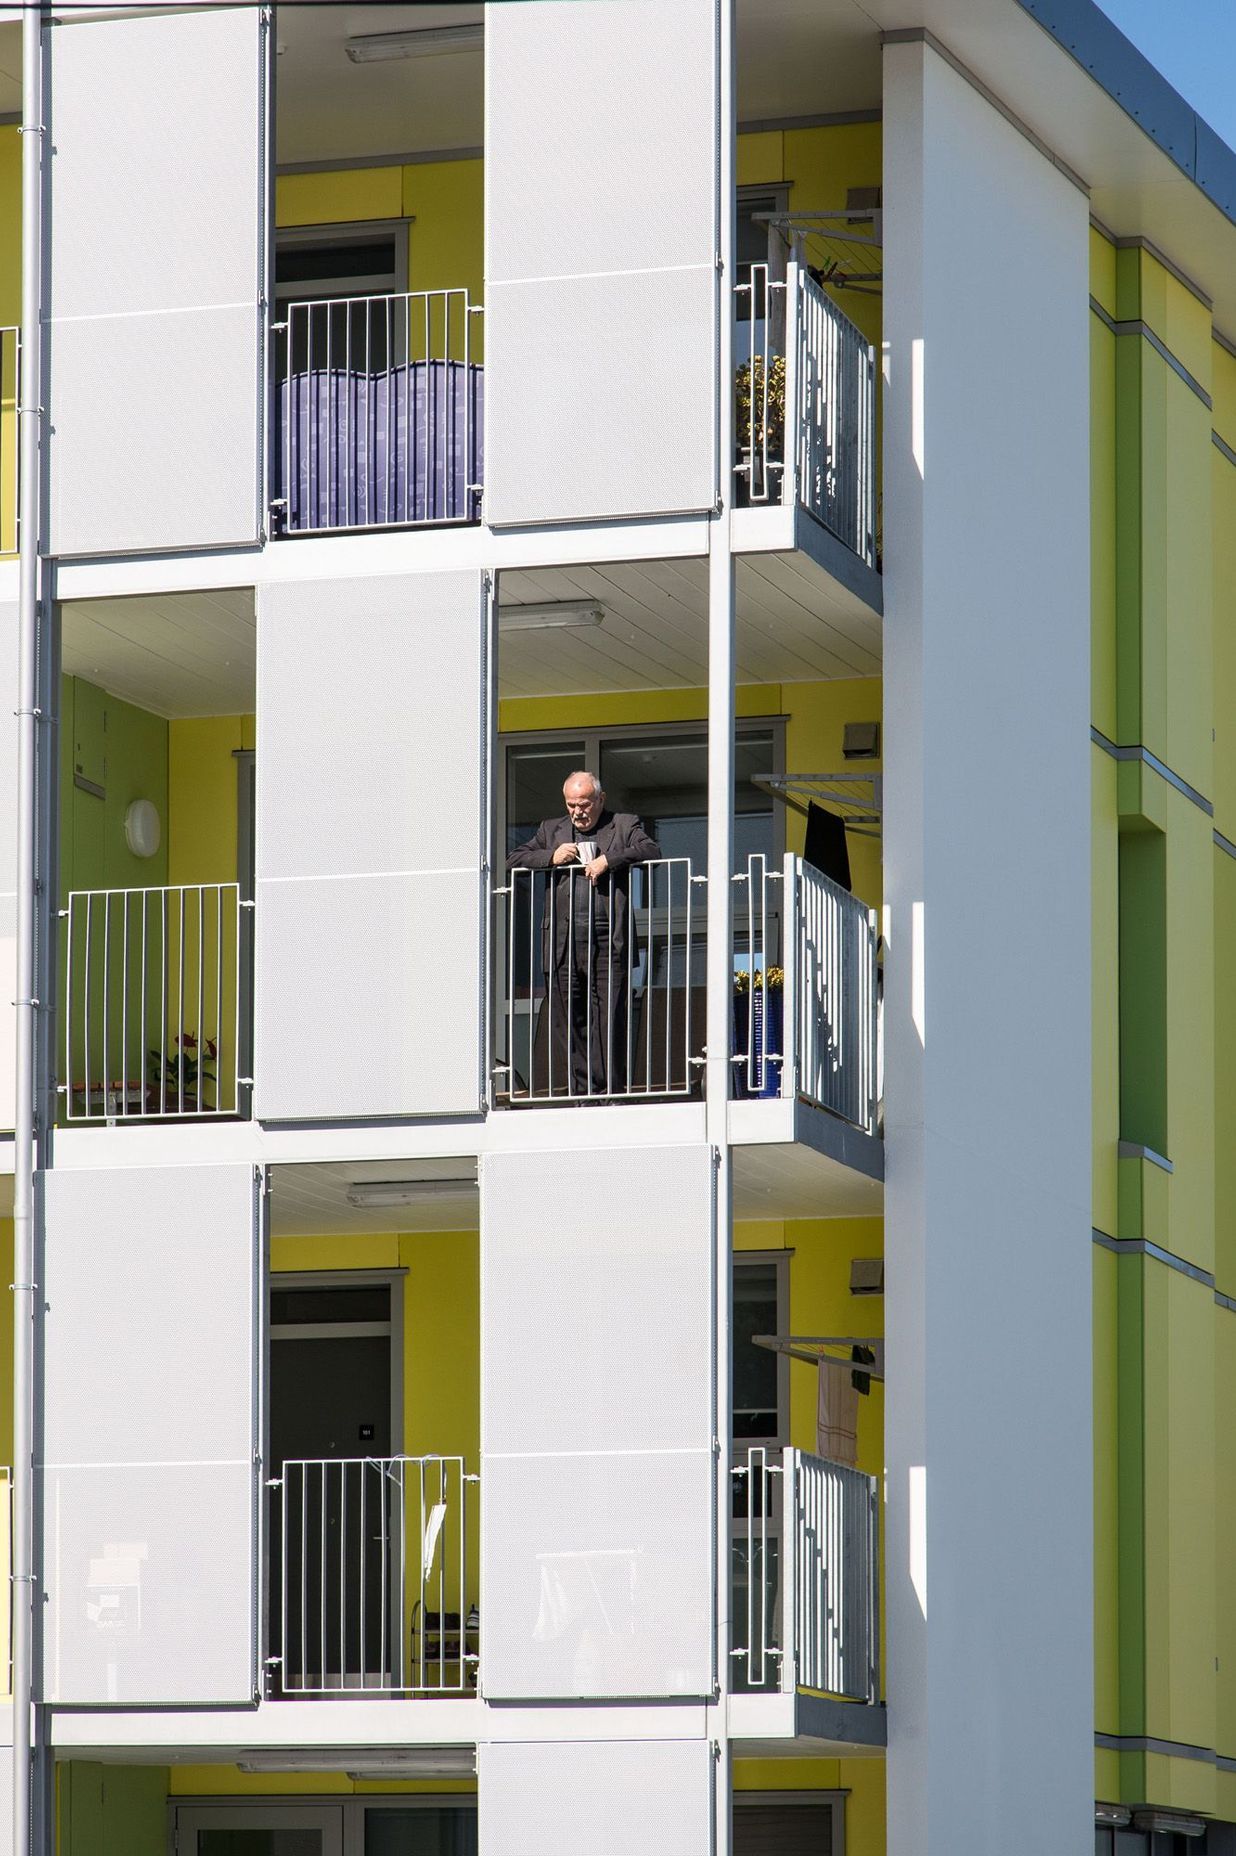 DGSE is investigating medium-density housing opportunities in Tauranga, similiar to the WCC Marshall Court Apartments in Wellington, above. Photographed by Paul McCredie.